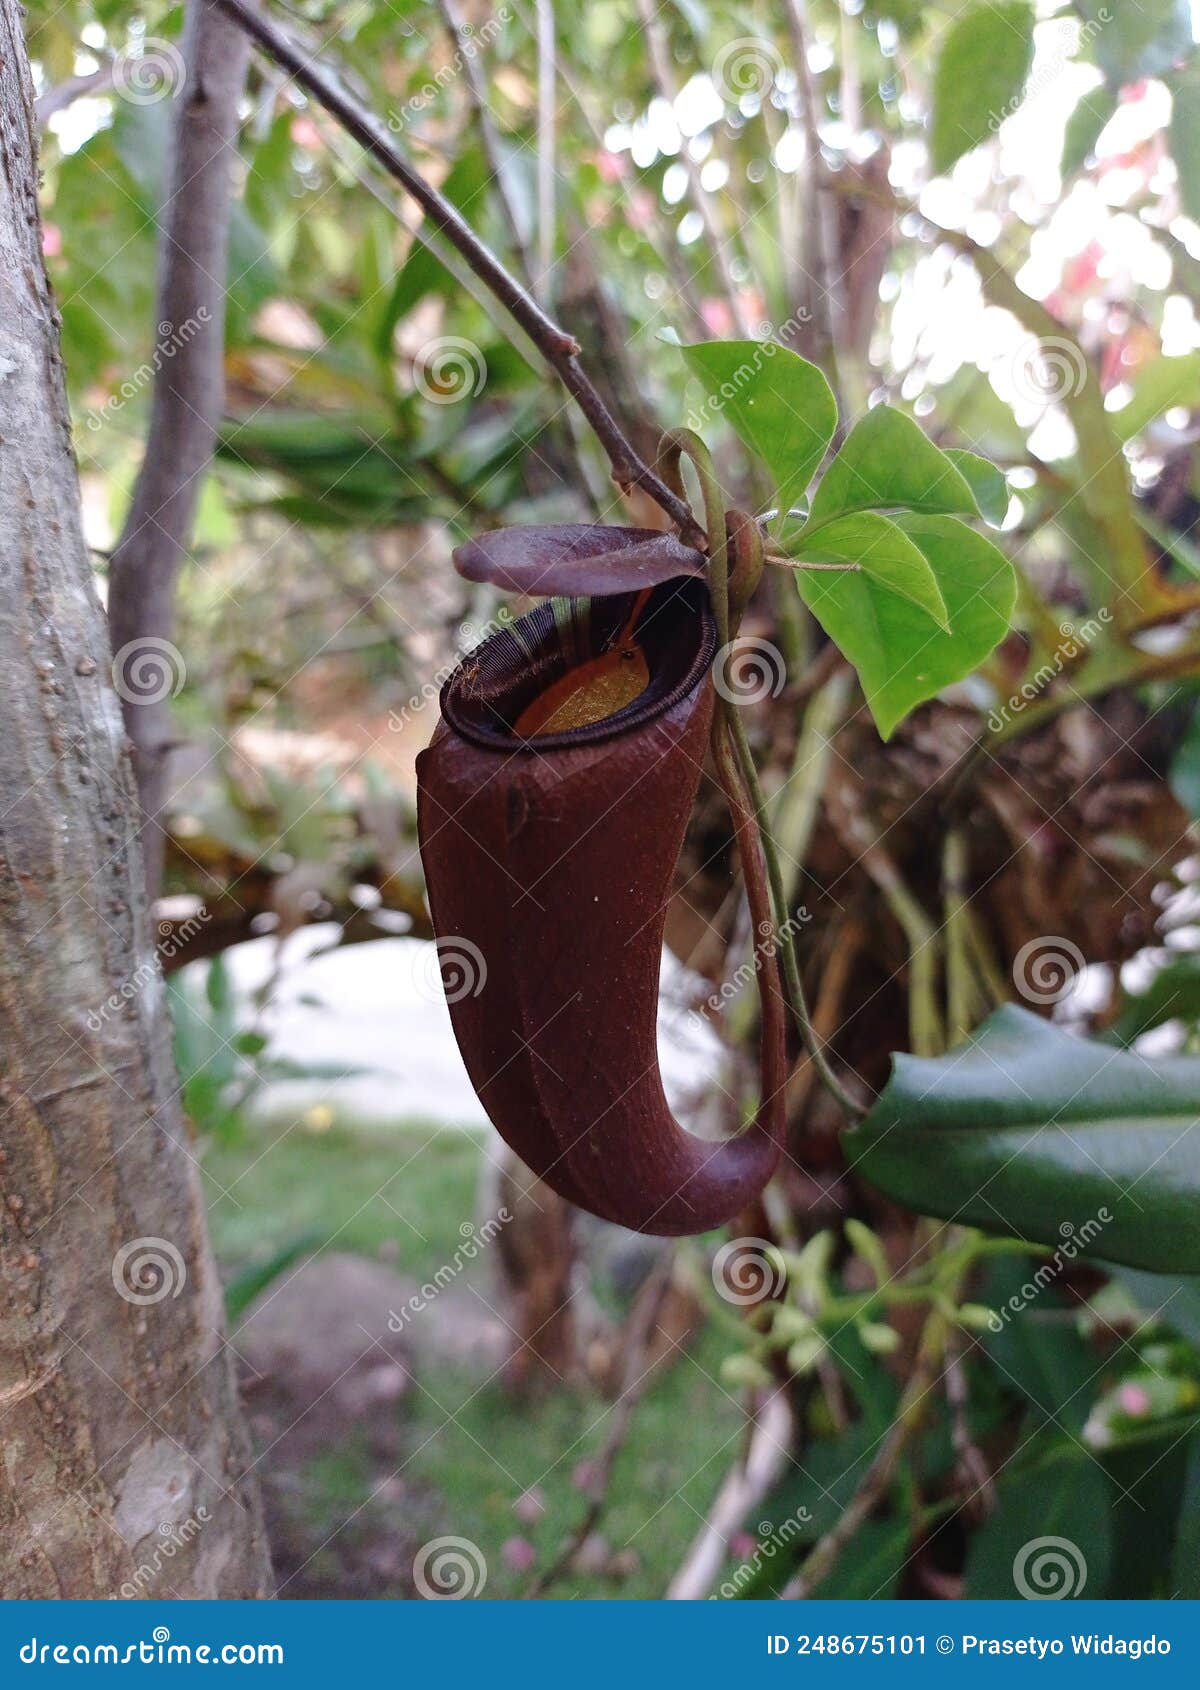 nepenthes hibrid orbiculata with ampullaria black miracle